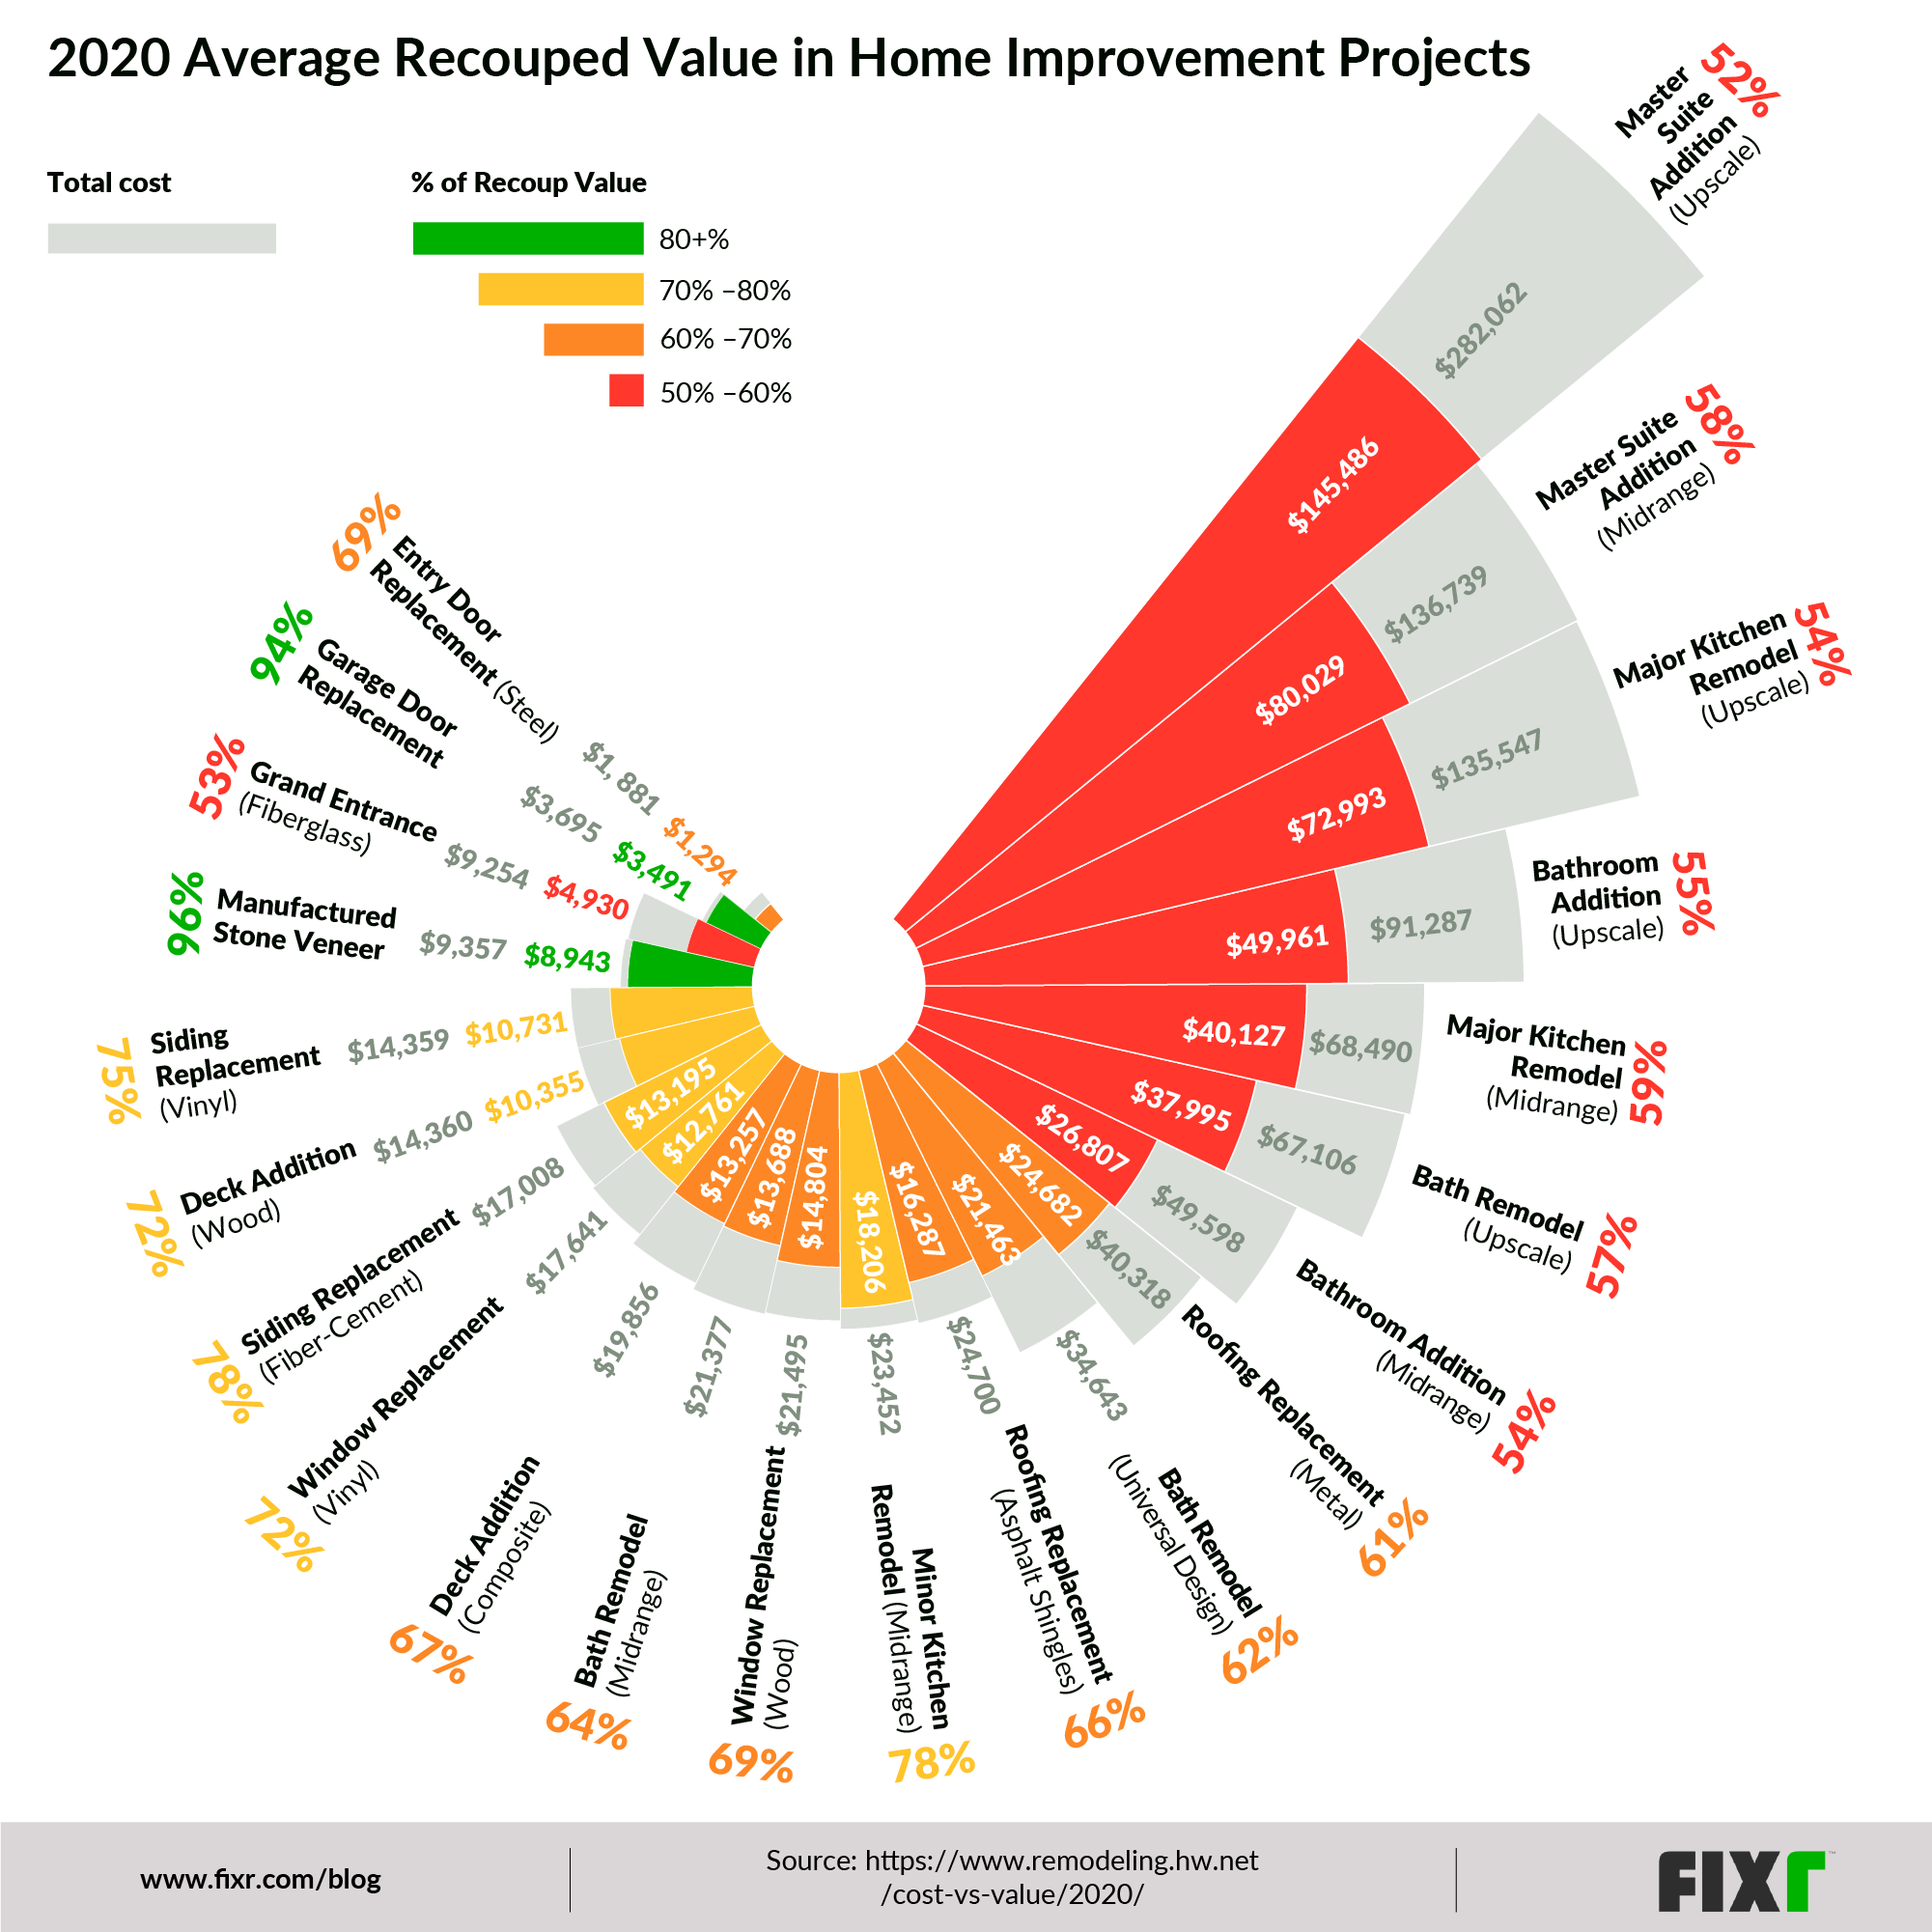 2020 average recouped value in home improvement projects